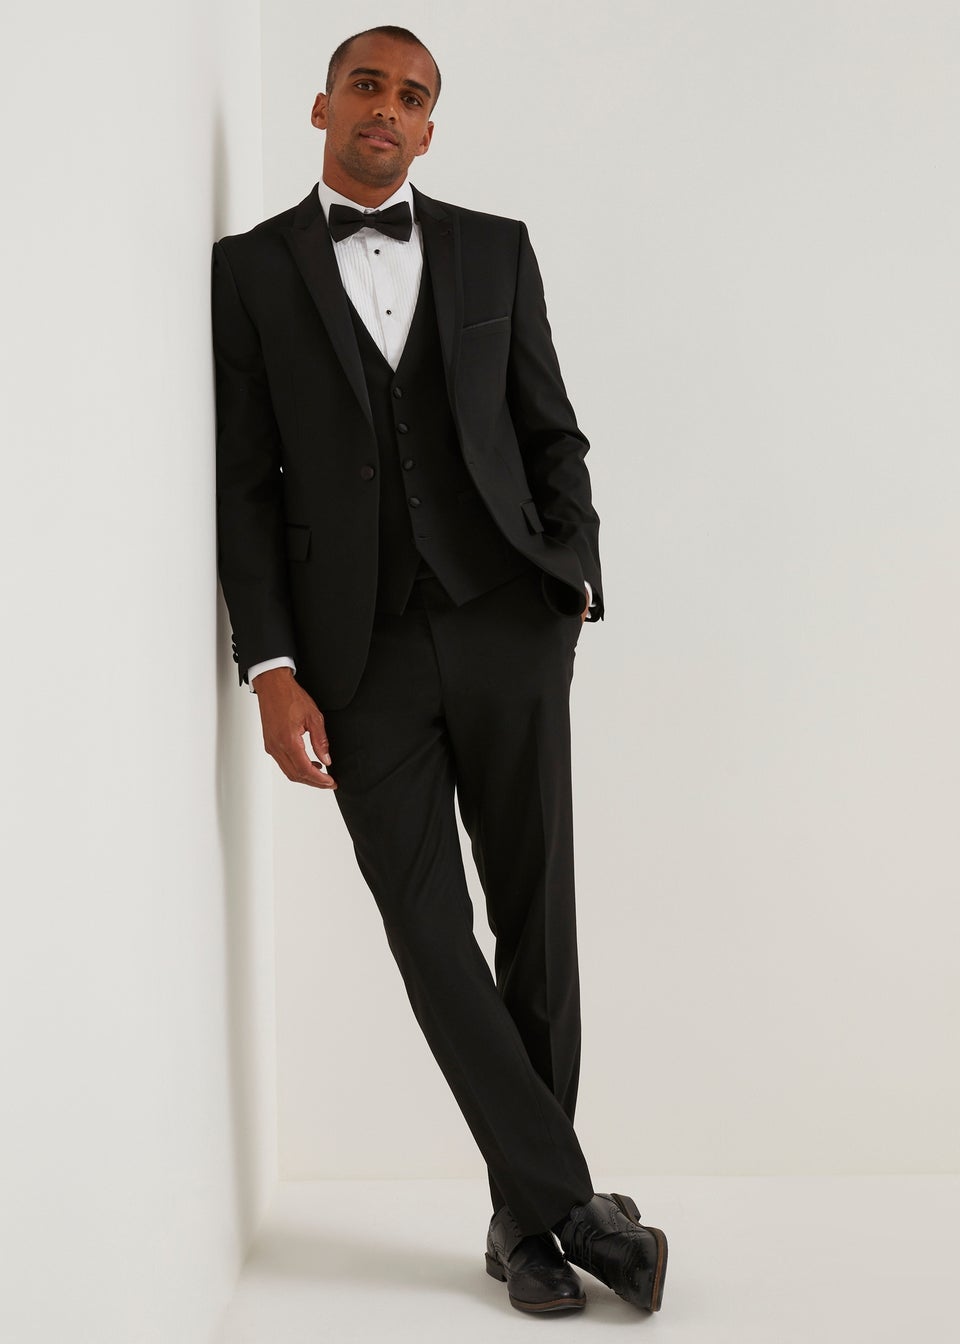 Taylor & Wright Black Tailored Fit Dinner Suit Jacket